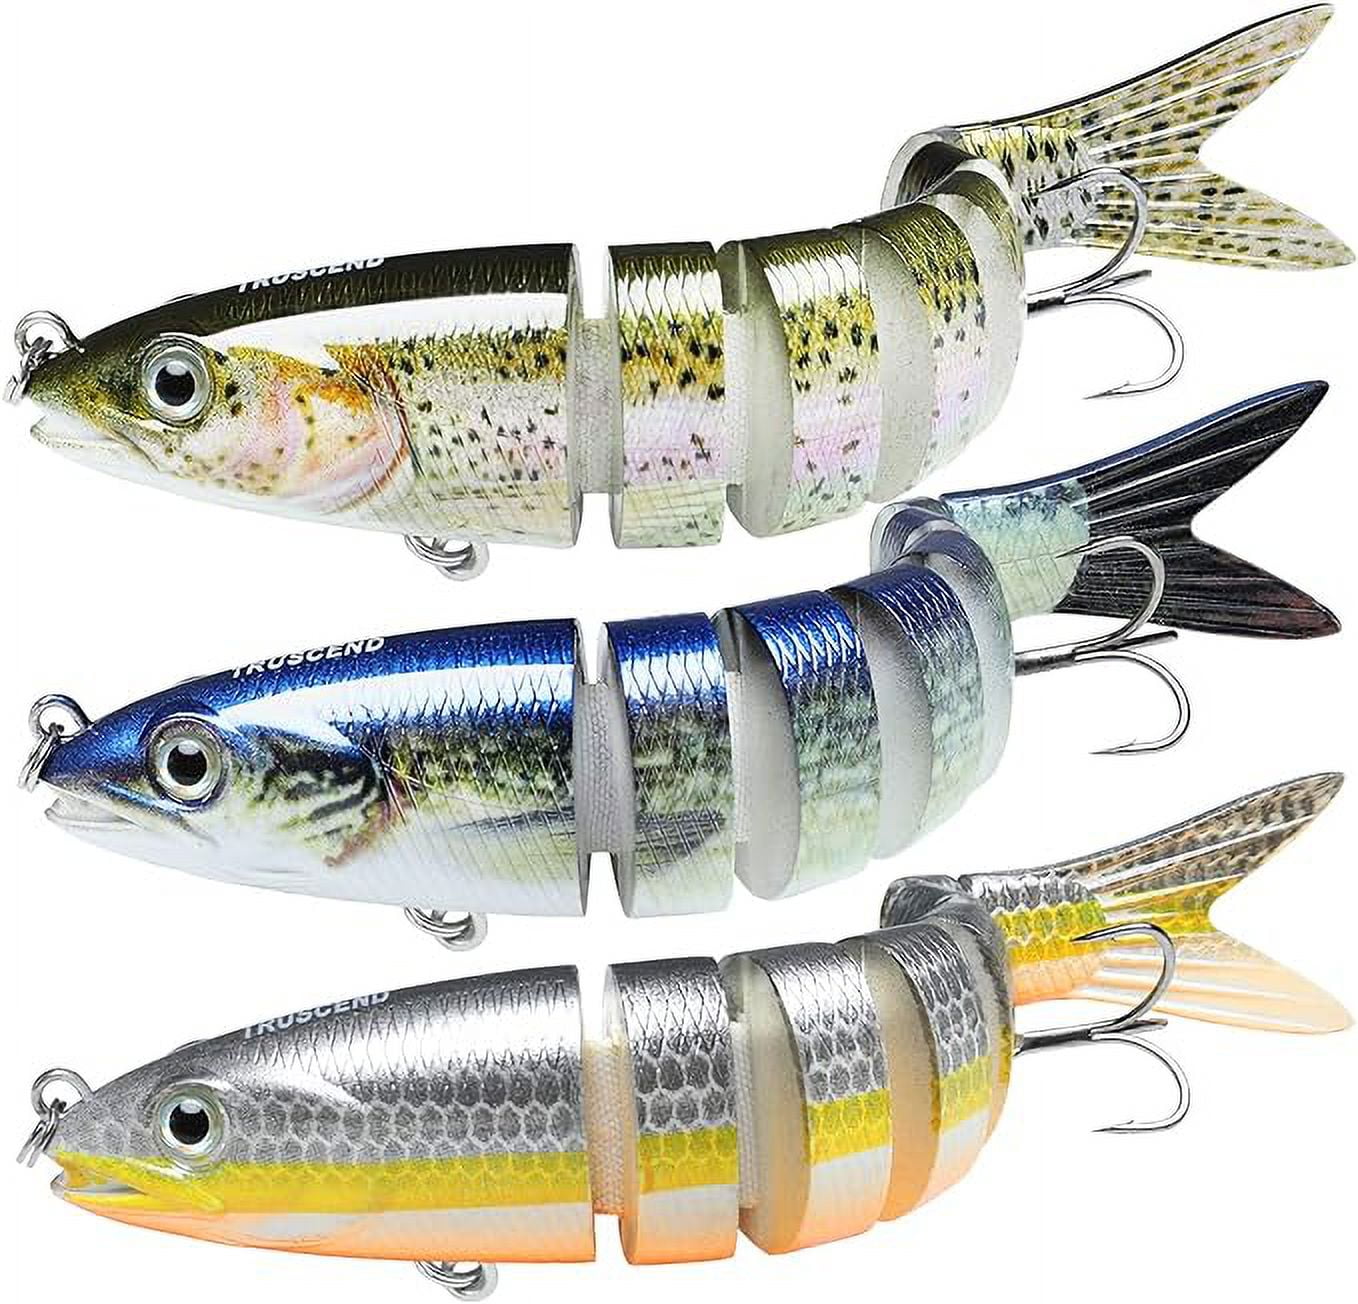  Fishing Lures for Bass Trout, Lifelike Multi Jointed Swimbaits Fishing  Accessories Slow Sinking Swimming, Freshwater Saltwater Bass Lifelike Fishing  Lures Kit (Pack of 1) : Sports & Outdoors